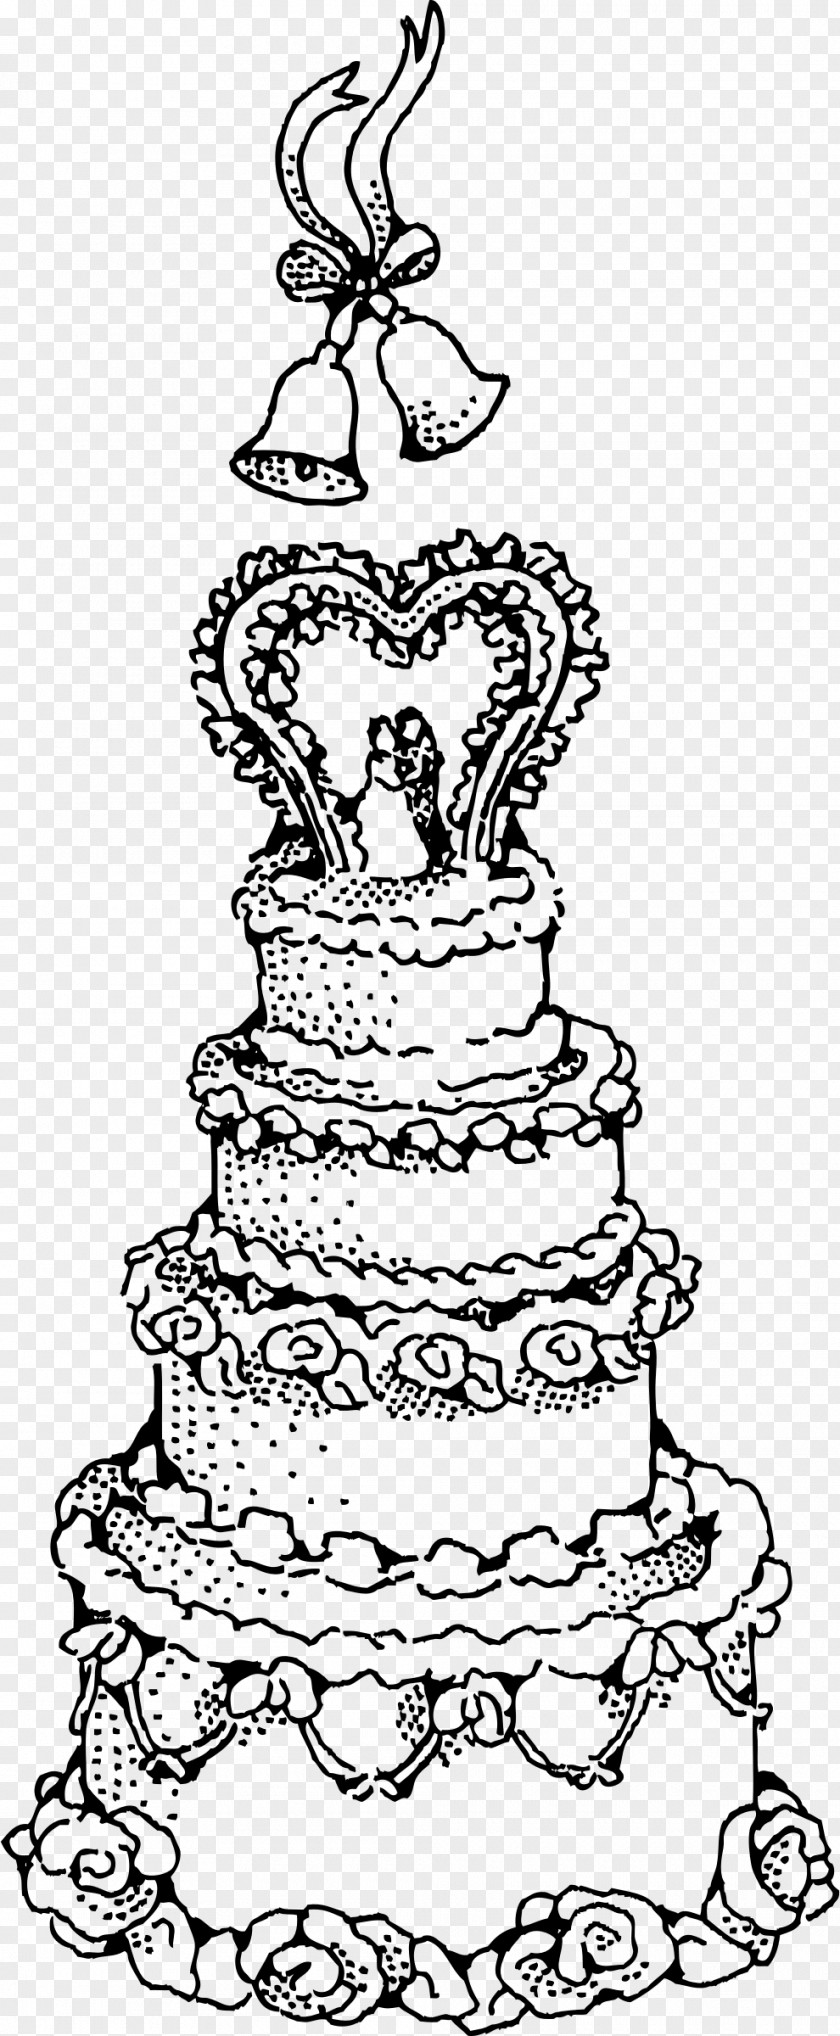 Wedding Cake Party Birthday Clip Art PNG